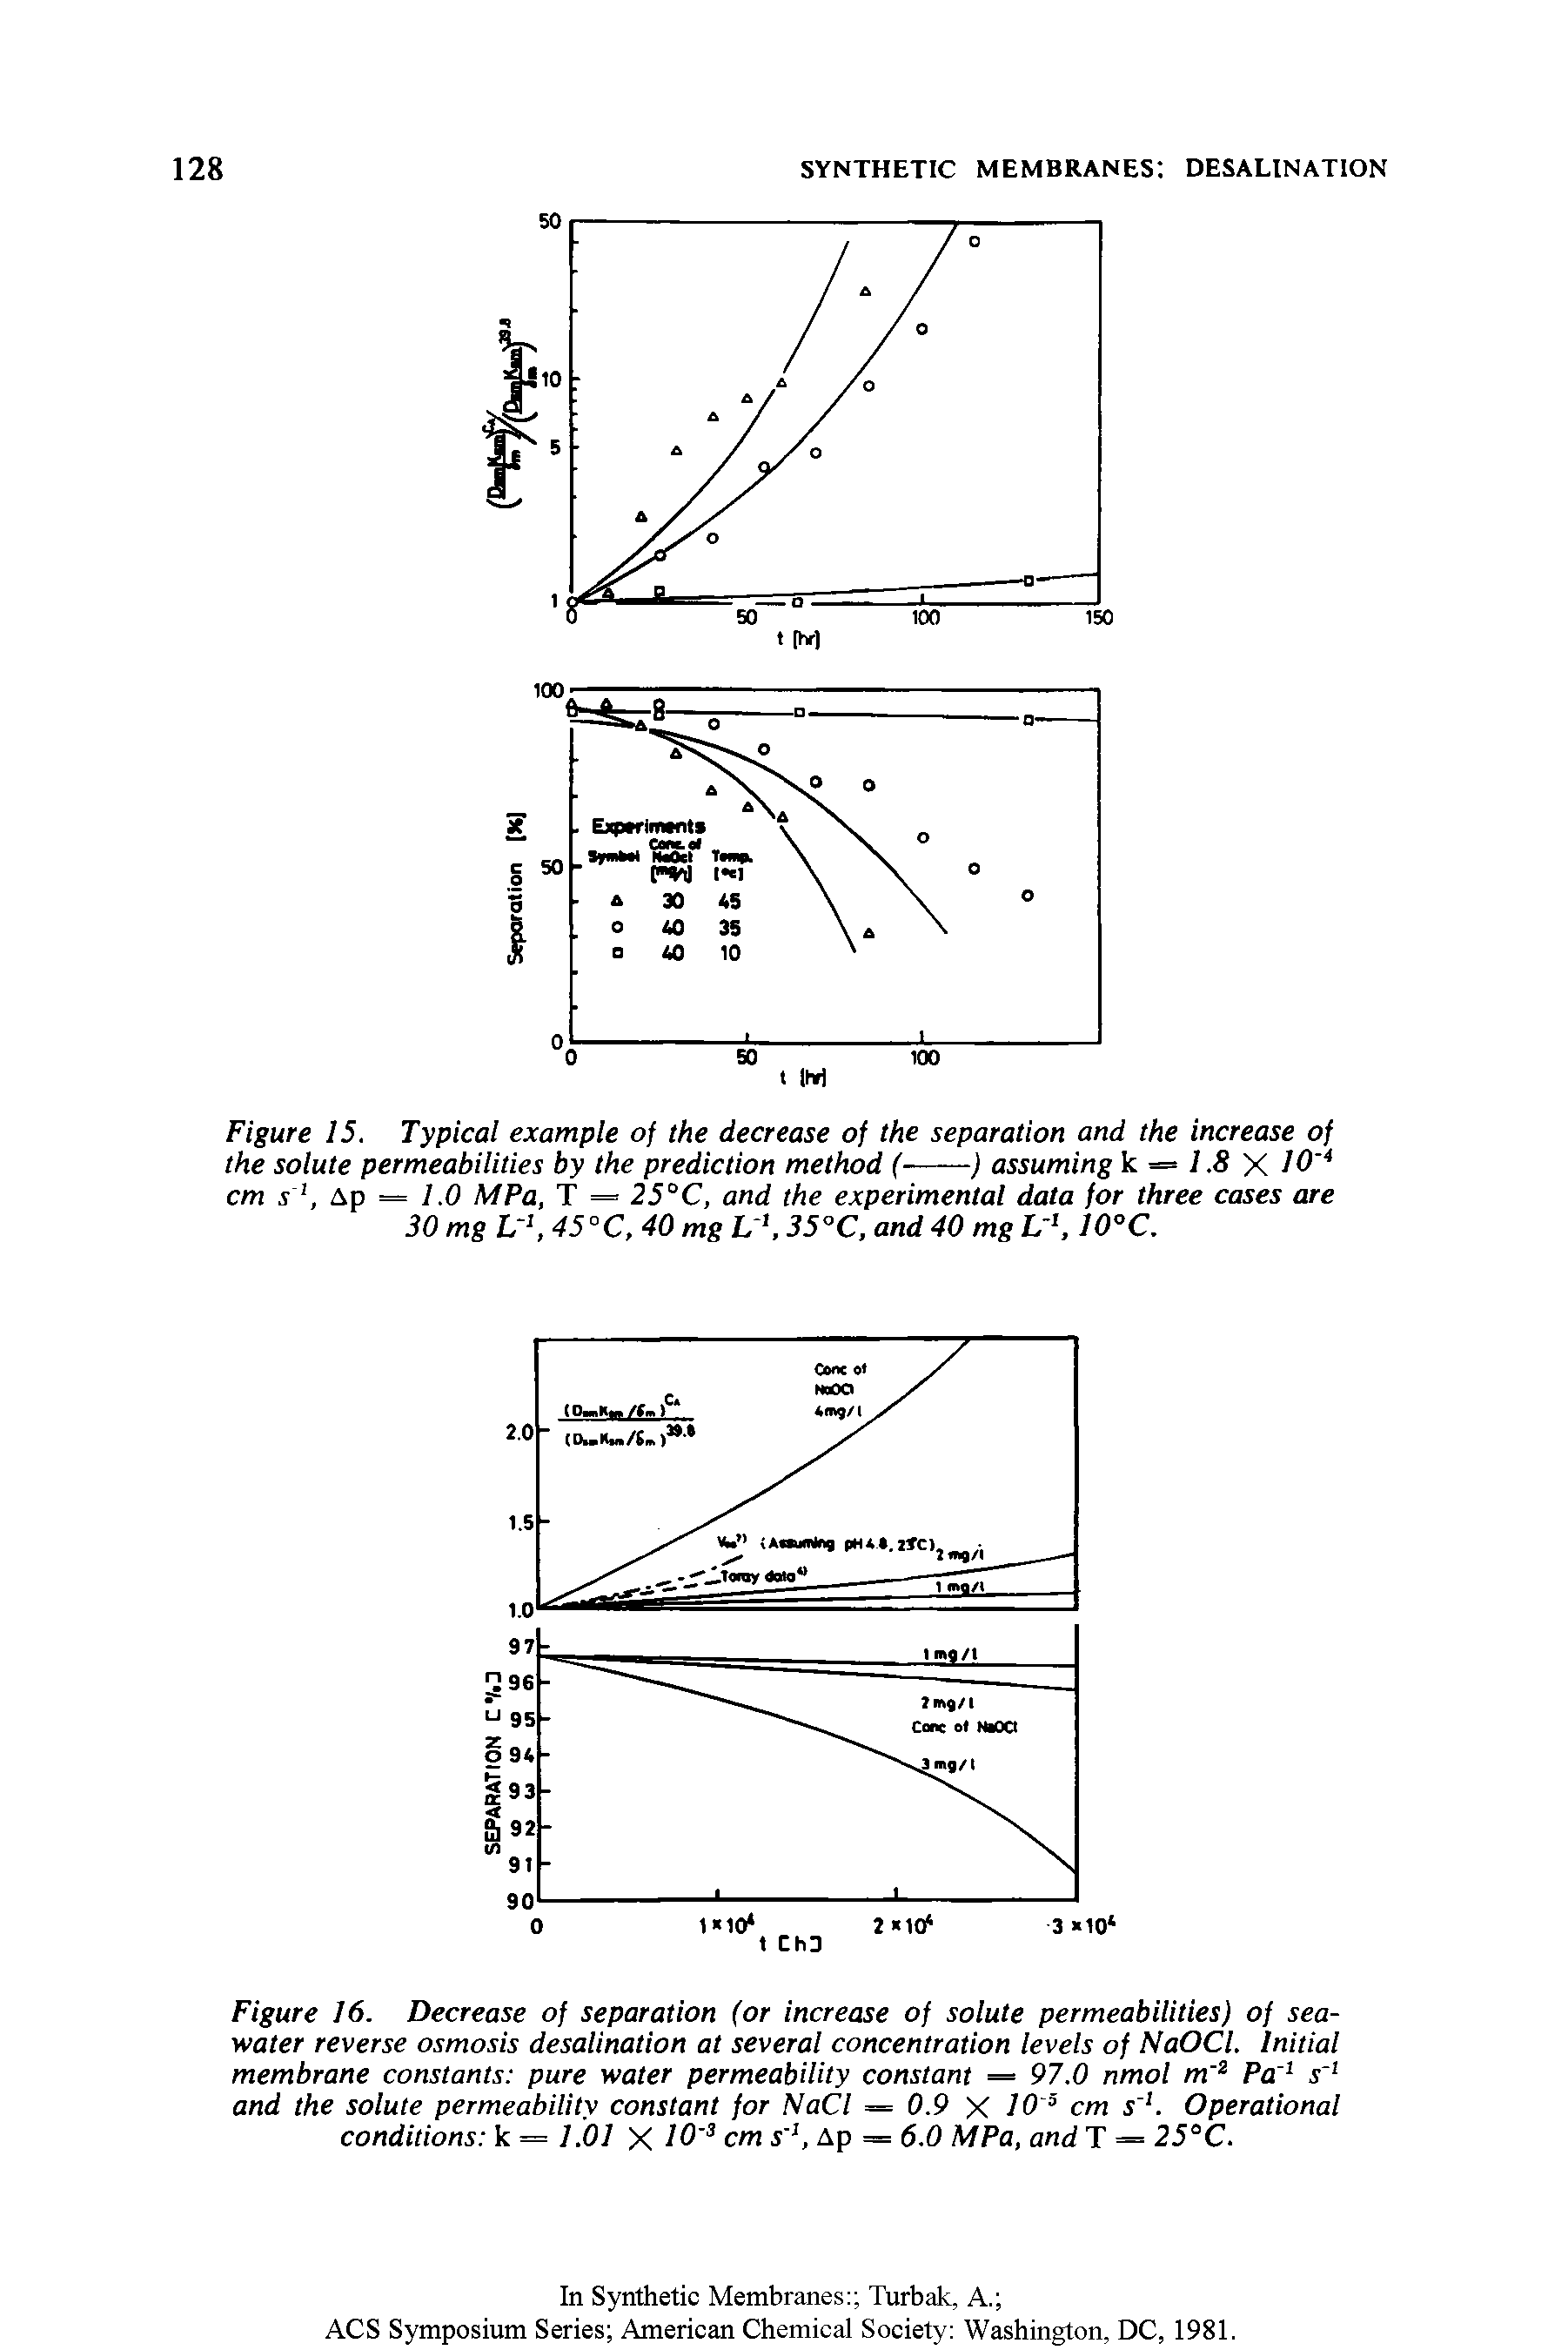 Figure 16. Decrease of separation (or increase of solute permeabilities) of seawater reverse osmosis desalination at several concentration levels of NaOCl. Initial membrane constants pure water permeability constant = 97.0 nmol m Pa s and the solute permeability constant for NaCl = 0.9 X 10 cm s . Operational conditions k = 7.(97 X 10 cm s Ap = 6.0 MPa, and T = 25°C.